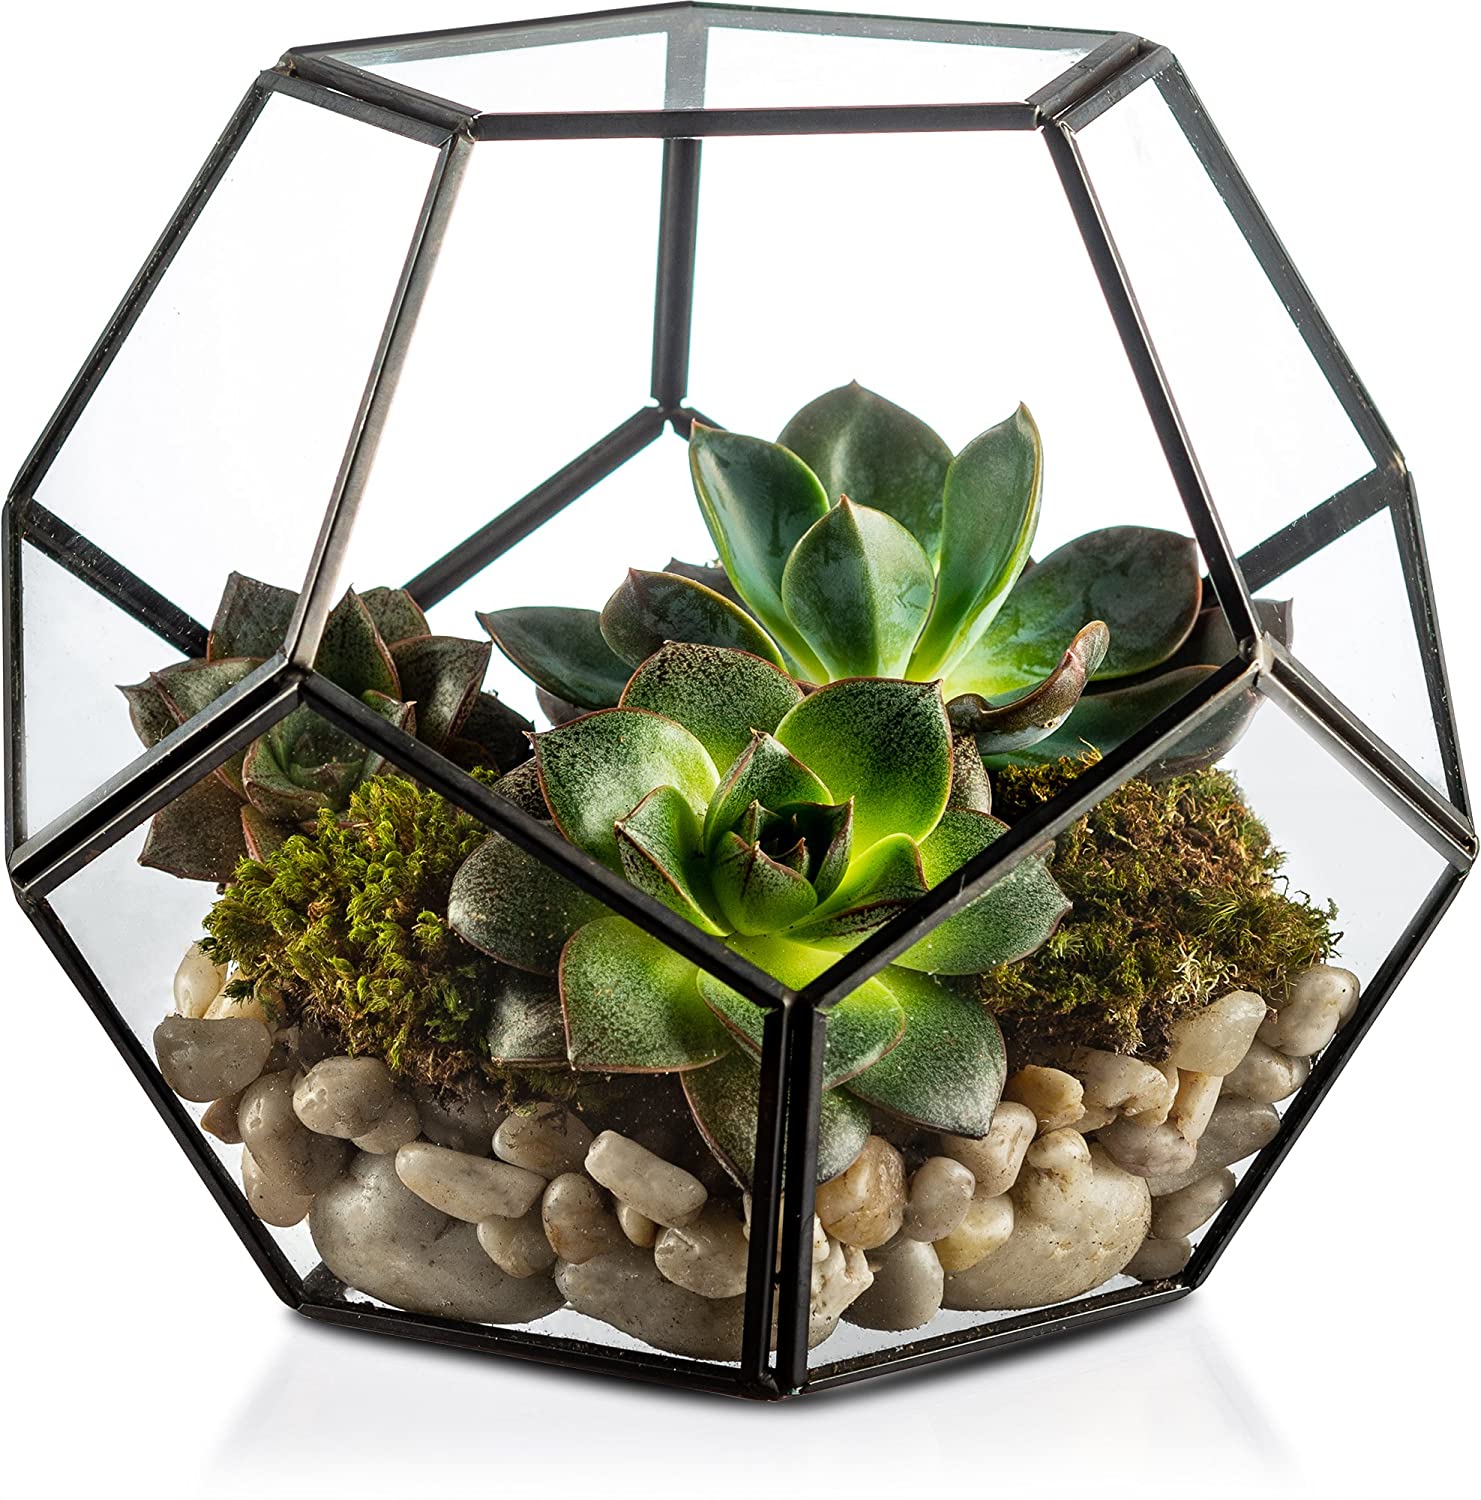 Why You Should Not Plant Succulents in a Terrarium